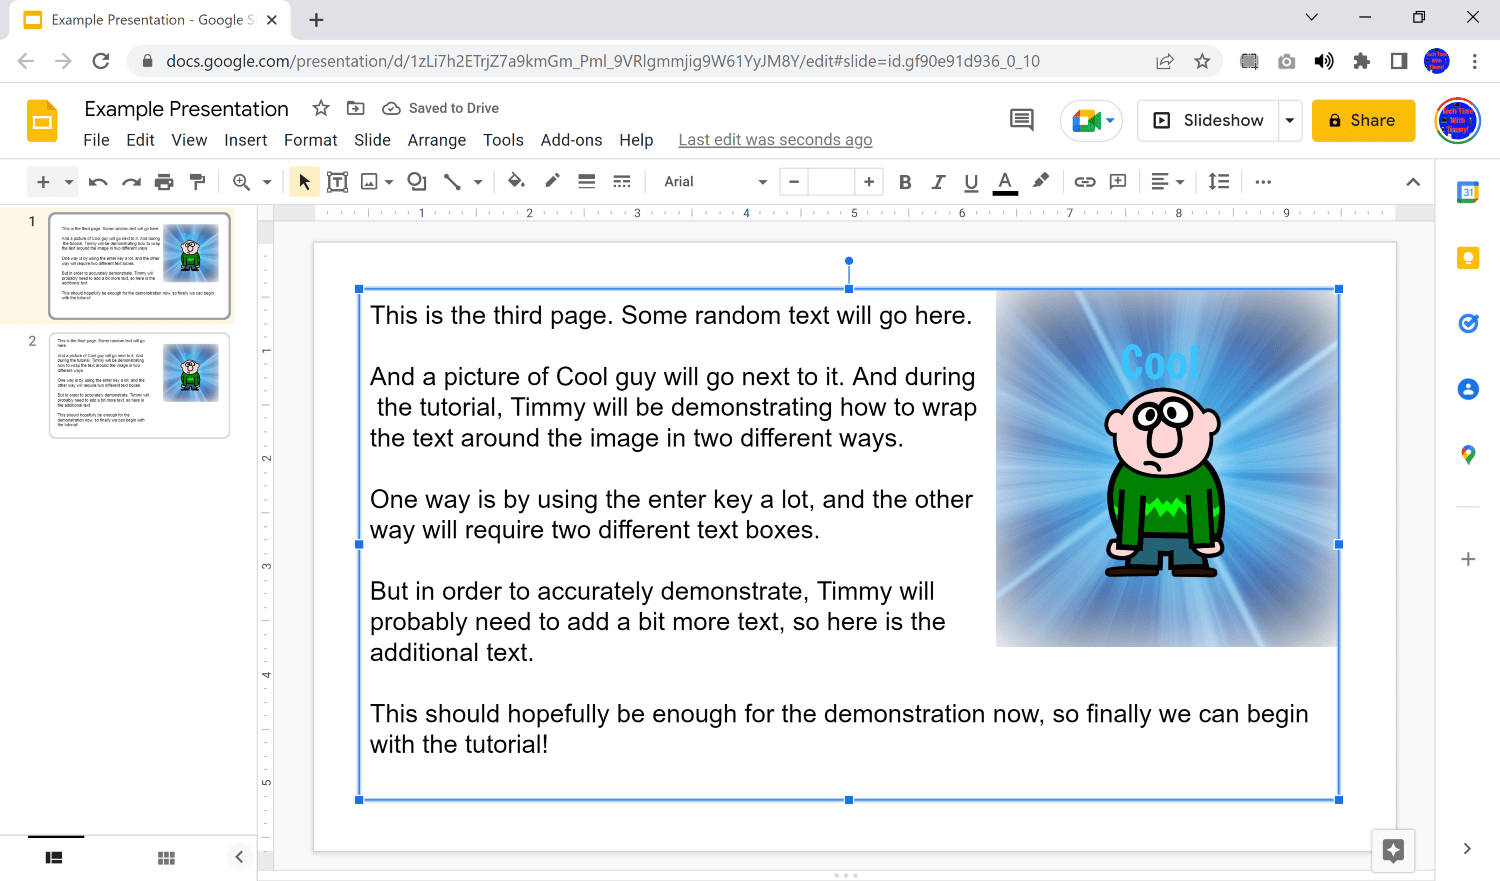 how to text wrap in google slides